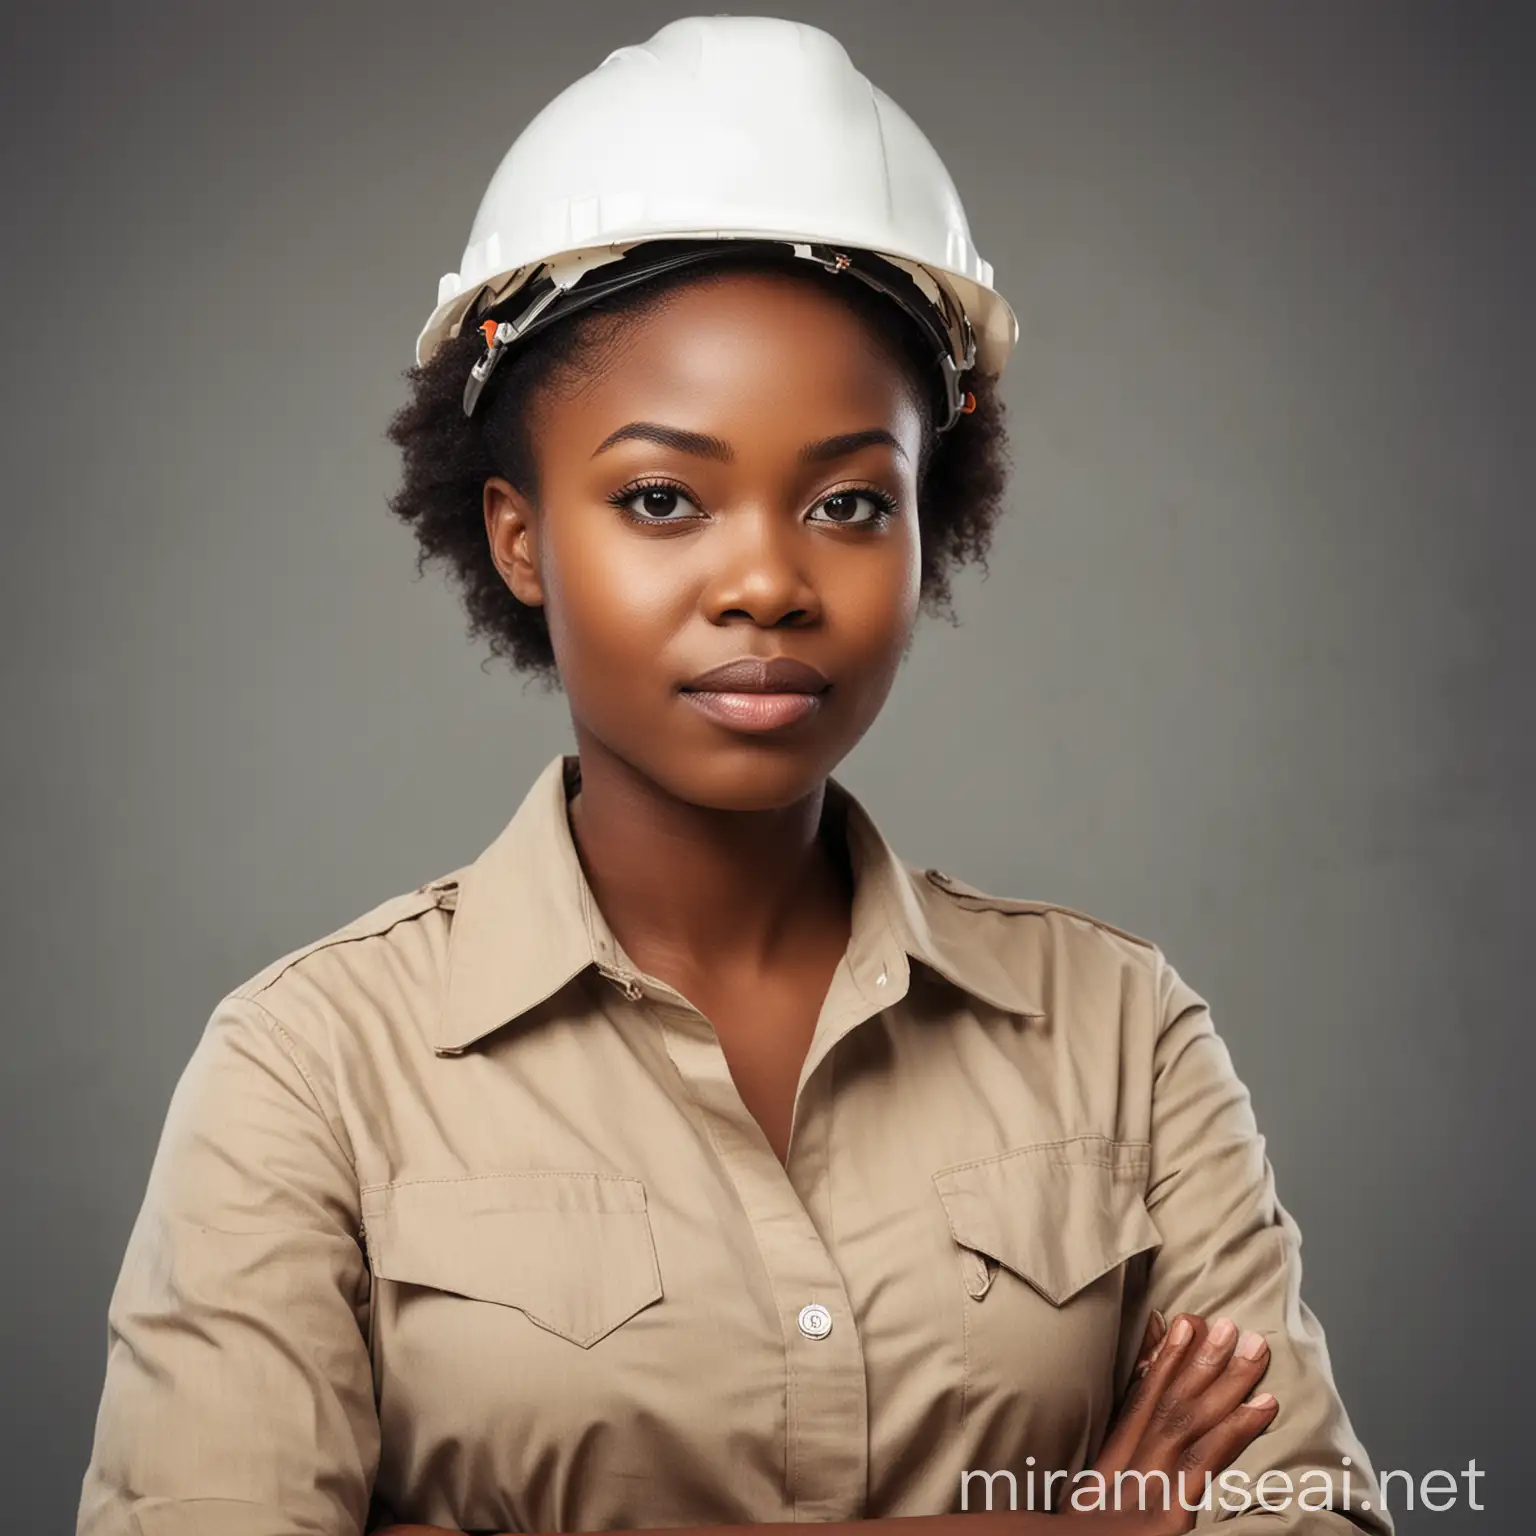 African Engineer Woman Working on Futuristic Technology